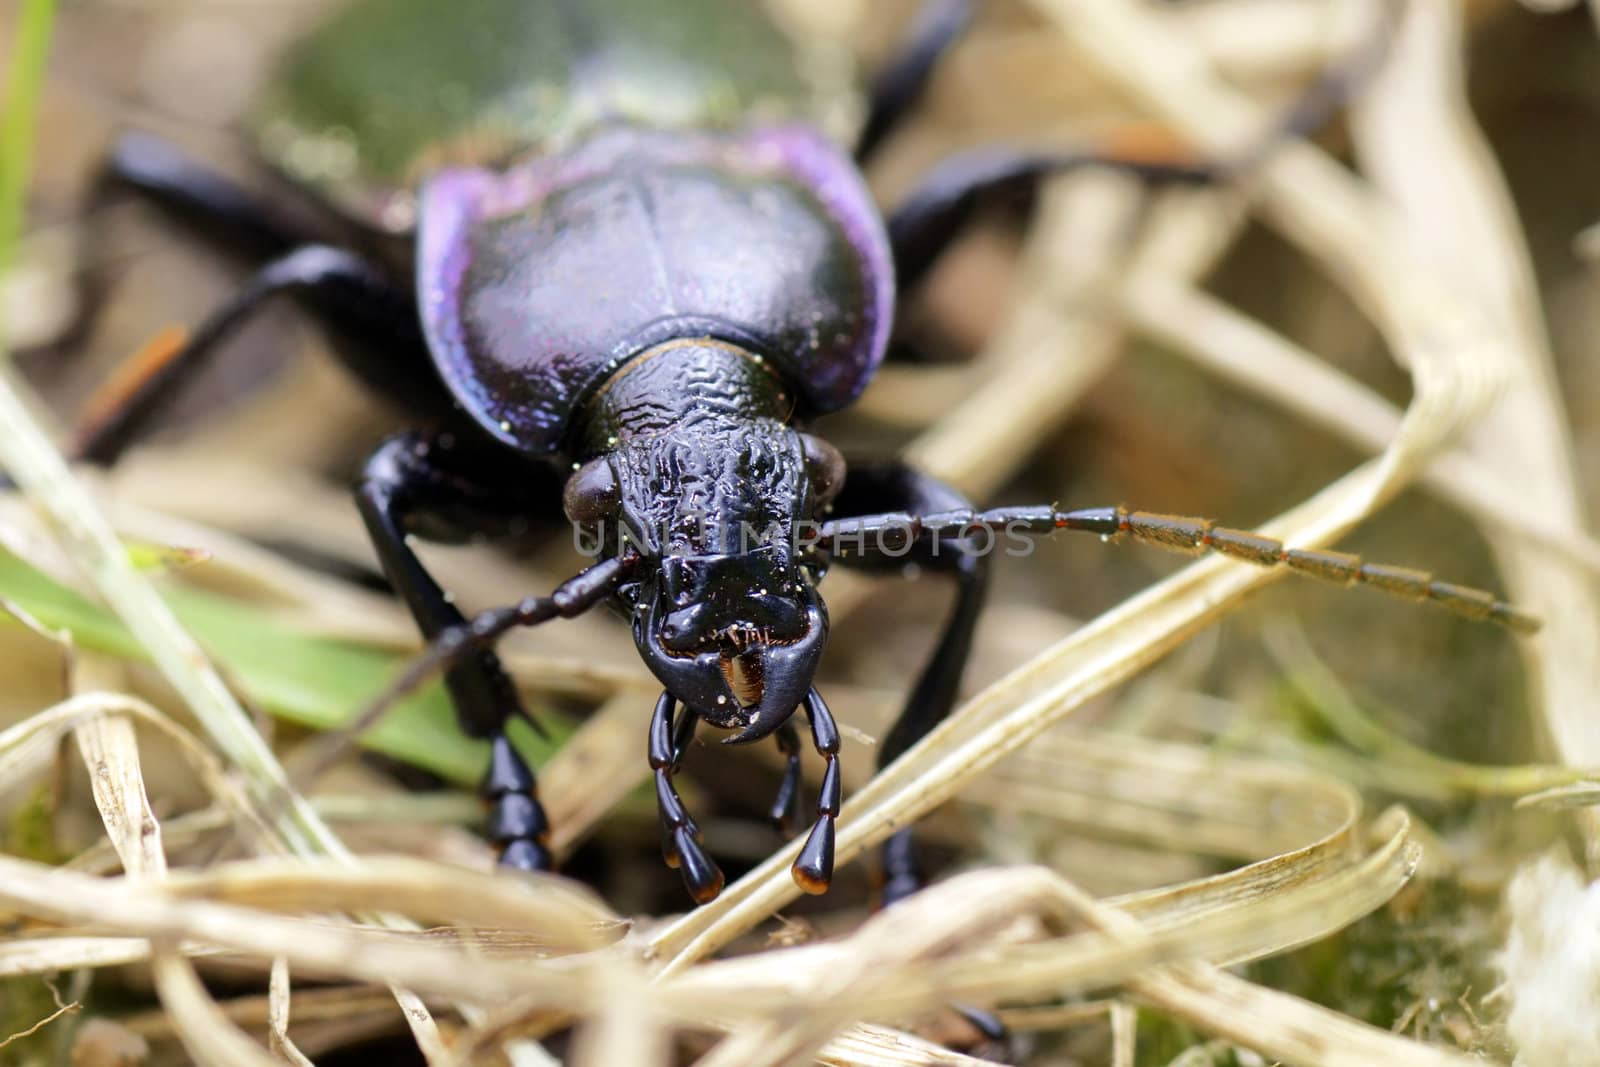 Lurking among the grass, a predato:r the purple-rimmed ground beetle, Carabus nemoralis, great details of the insect face and madibule.